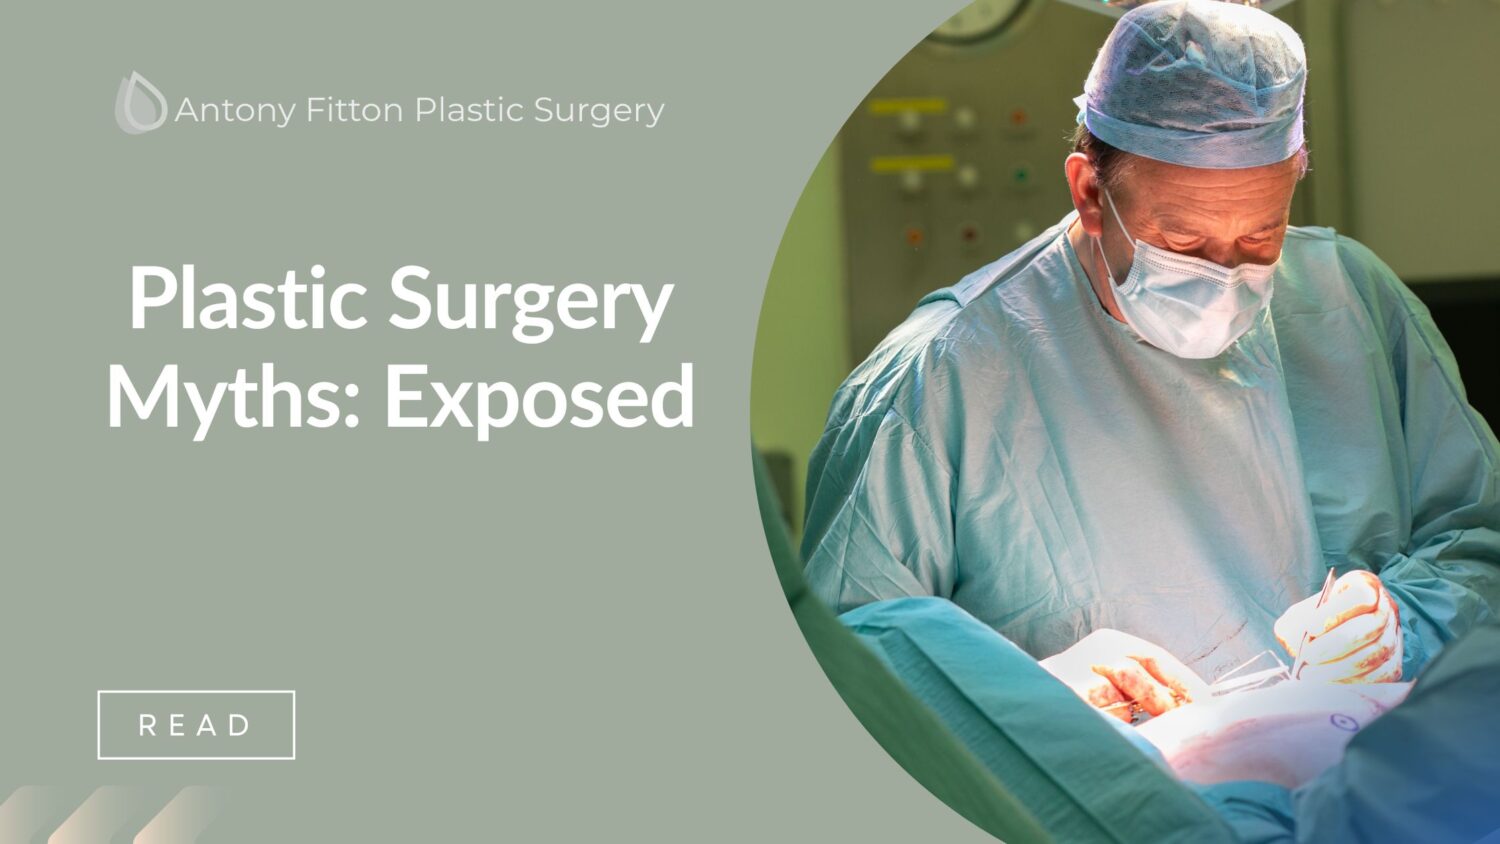 Plastic Surgery Myths exposed